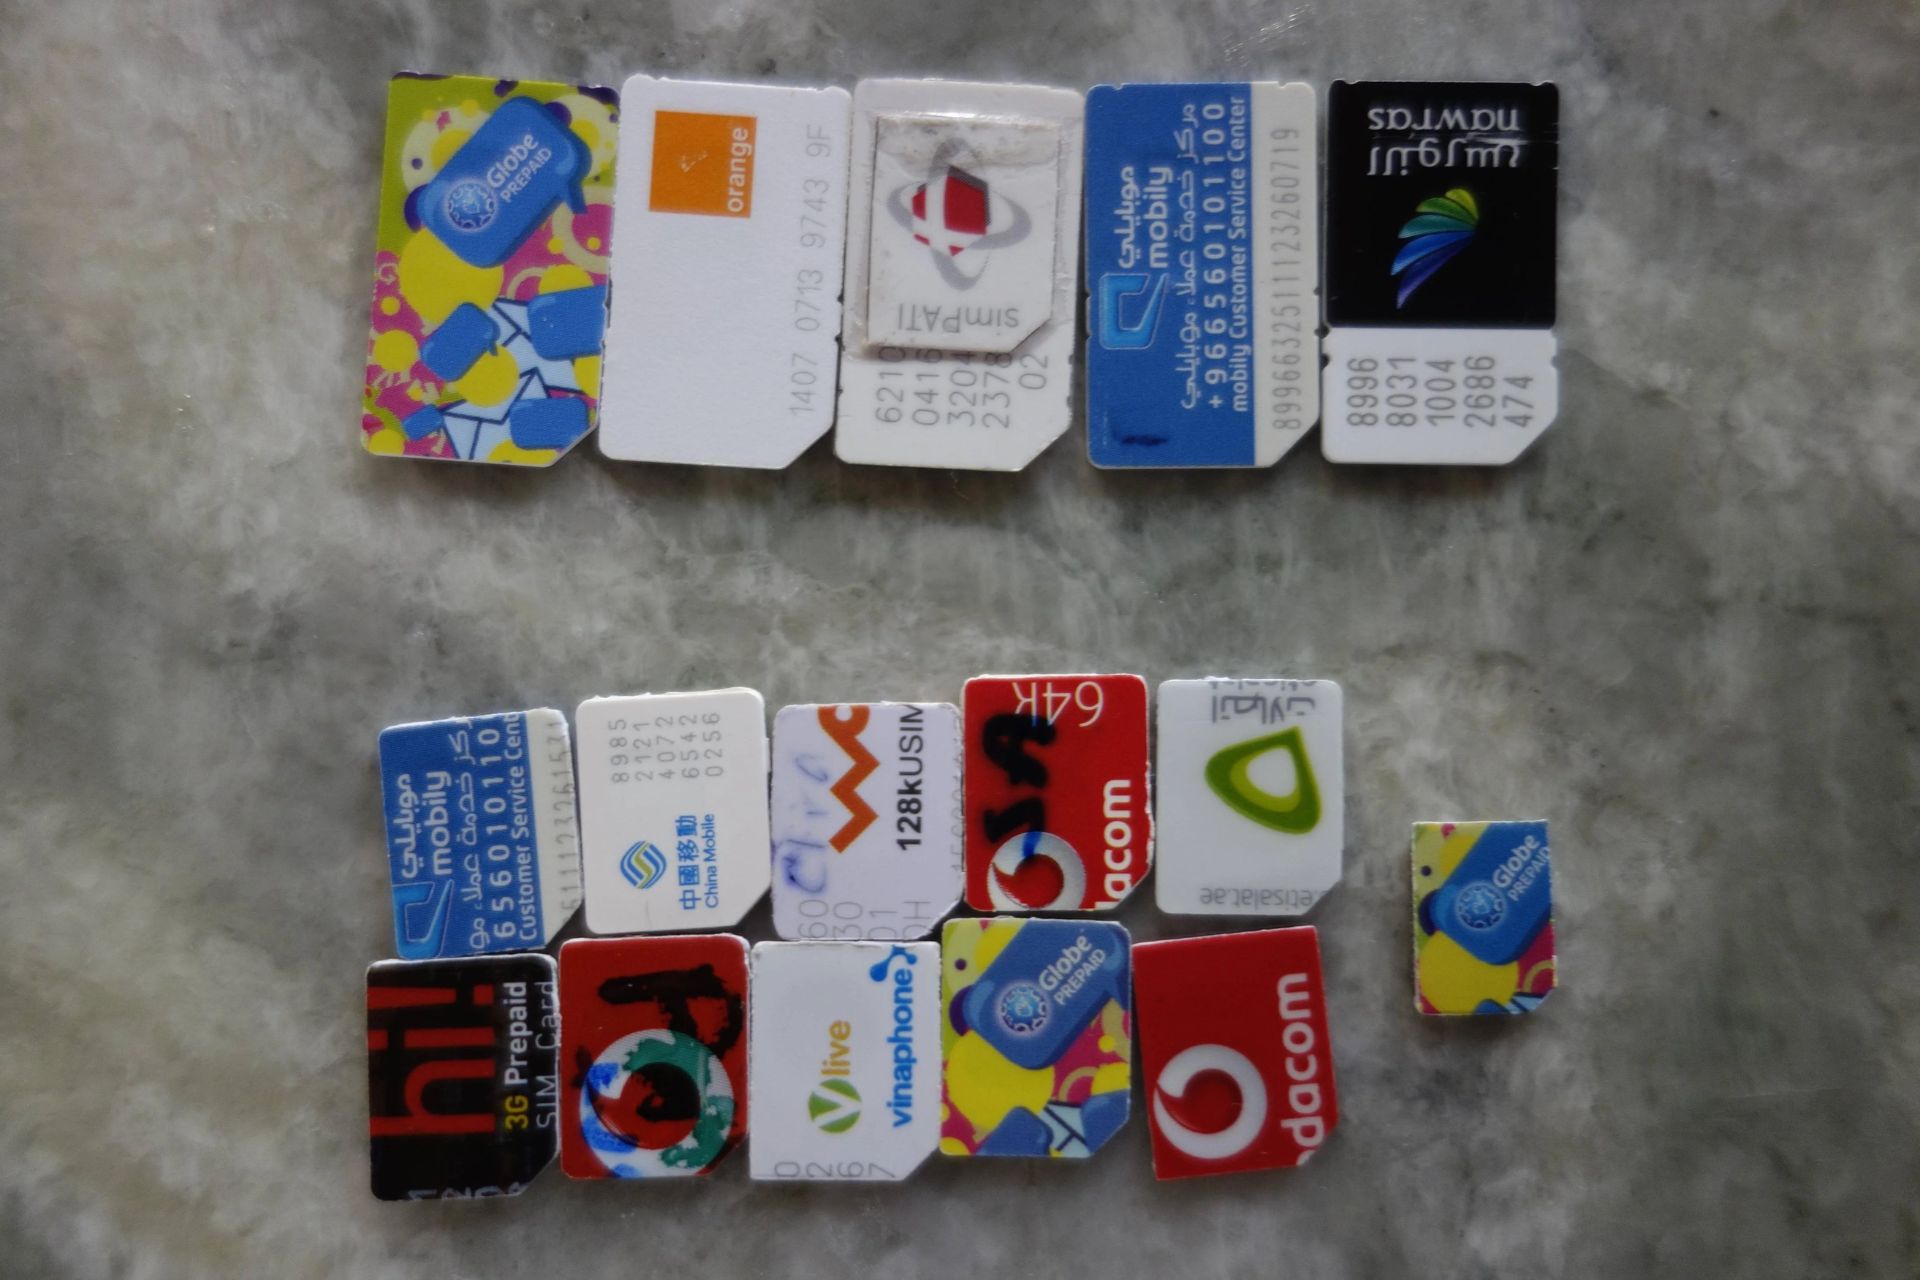 Handling Old SIM Cards: Important Considerations